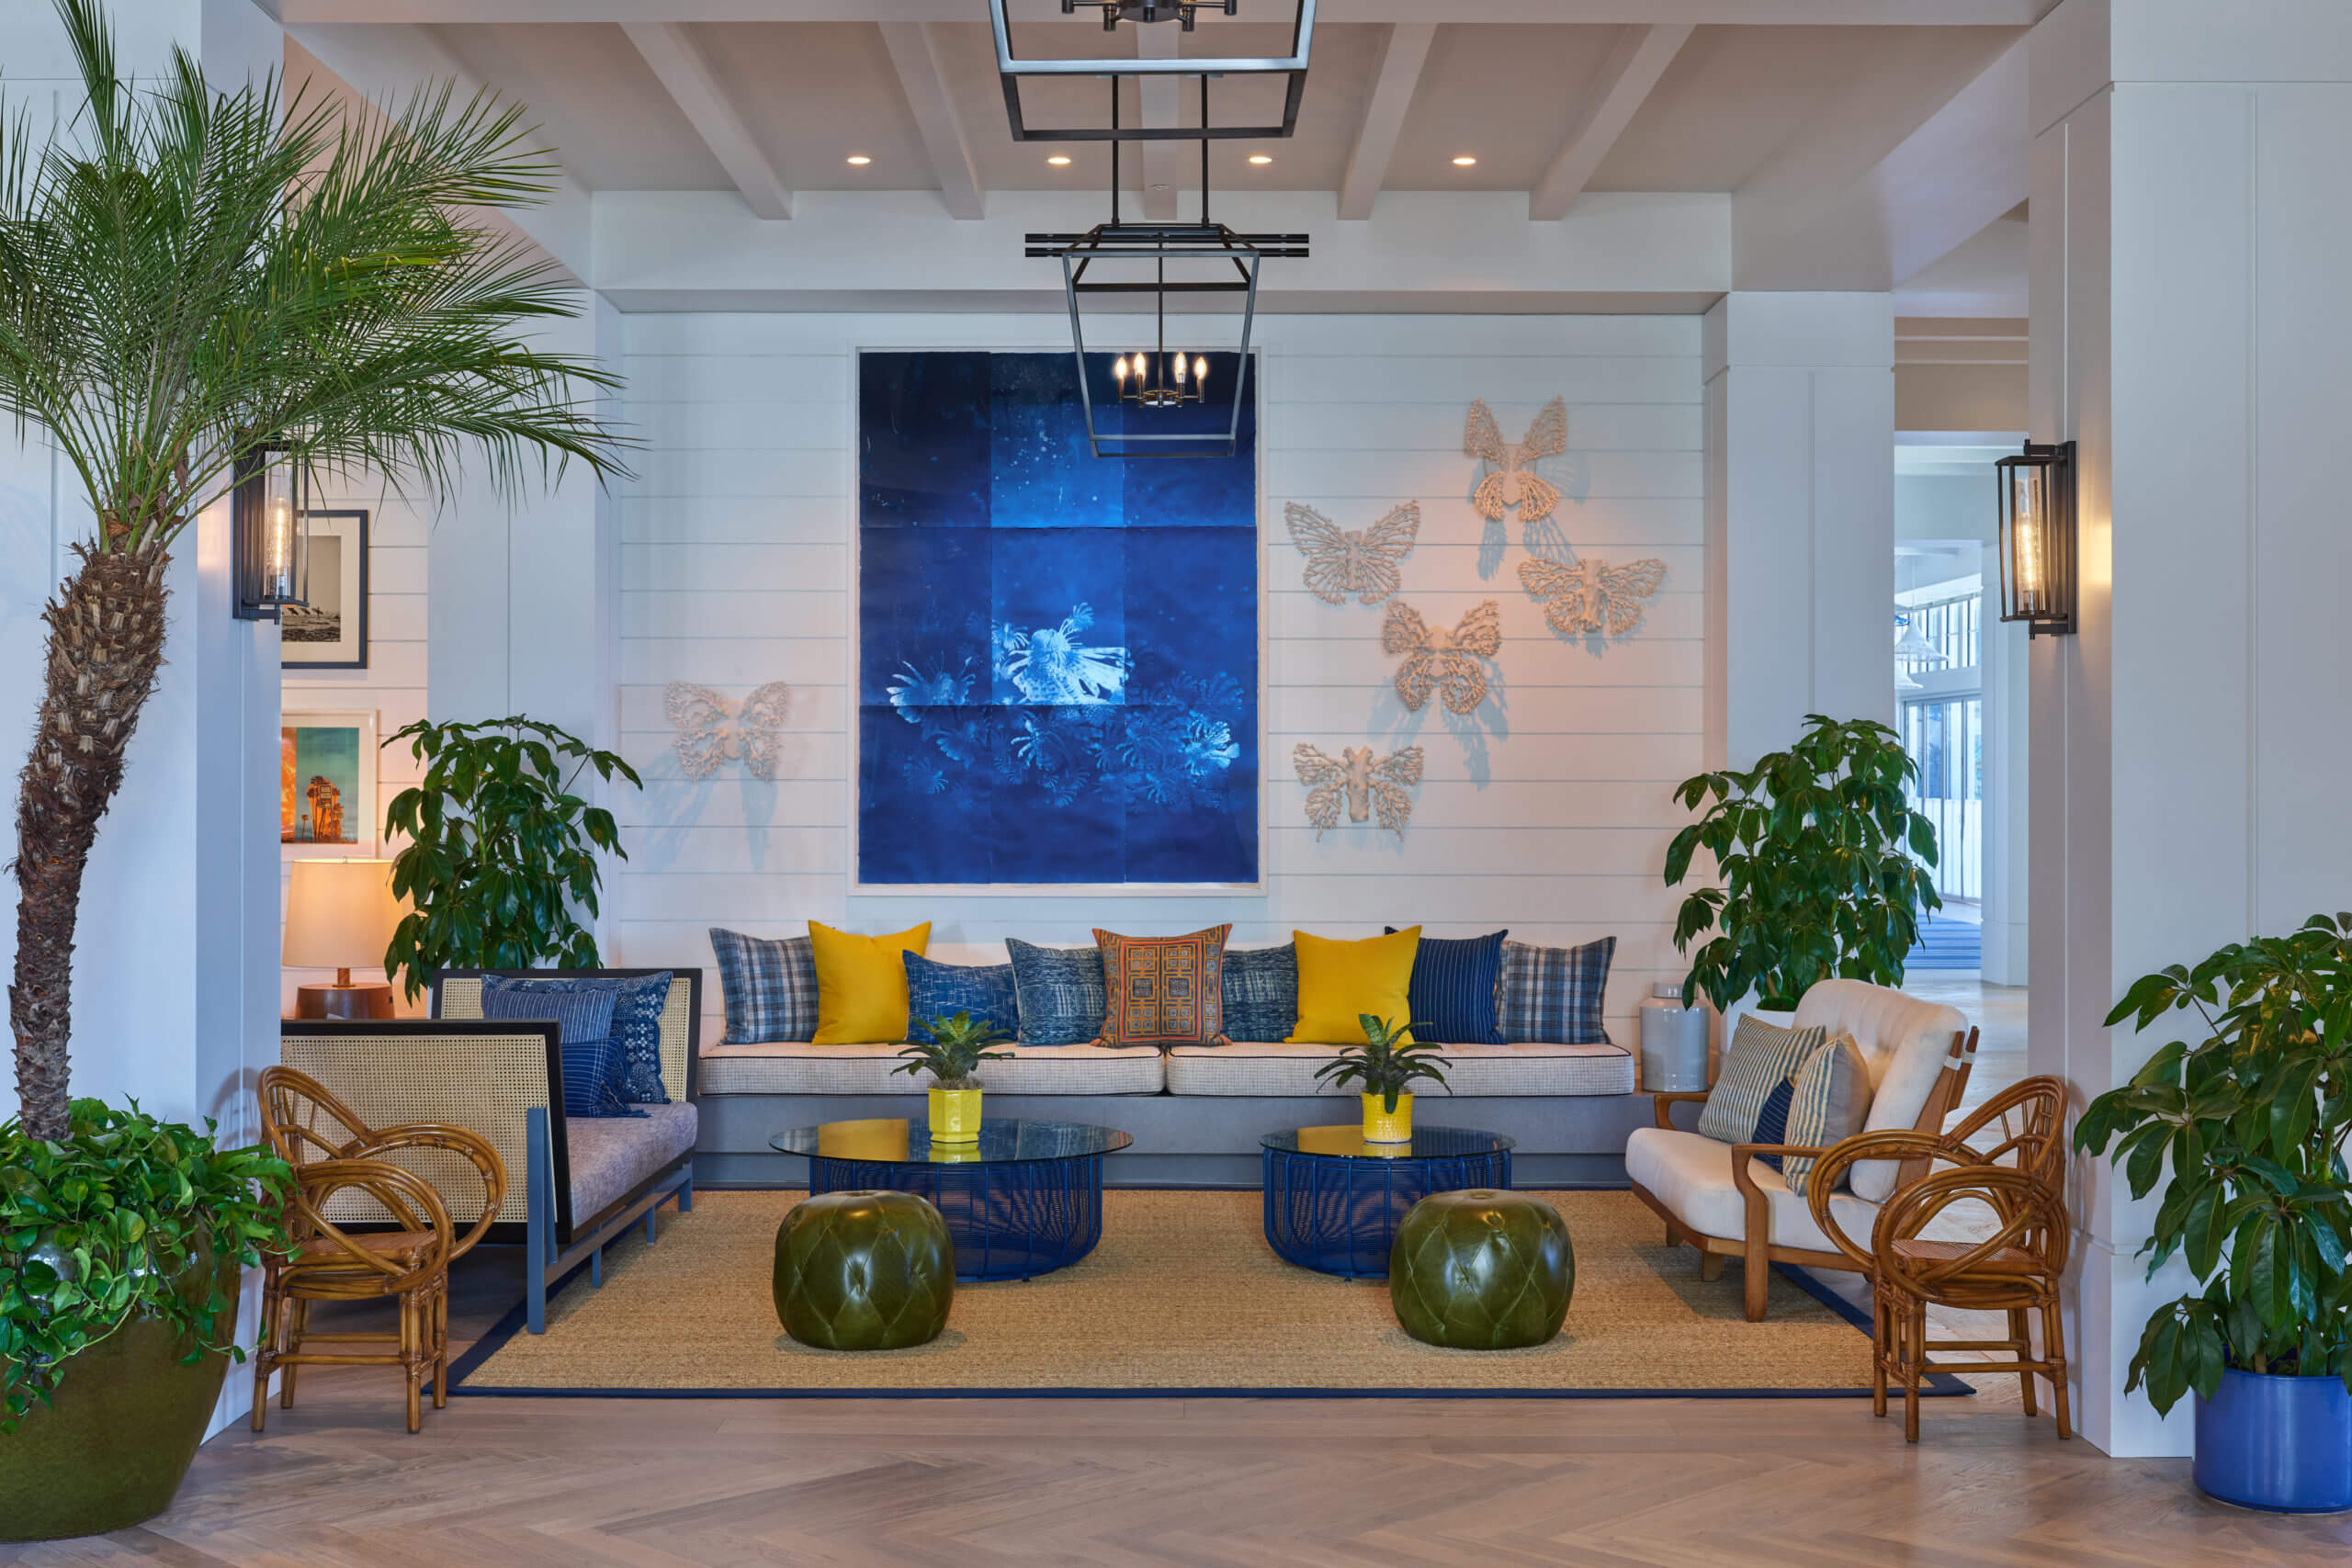 The Lobby with yellow and blue cushions. Blue paintings and butterflies